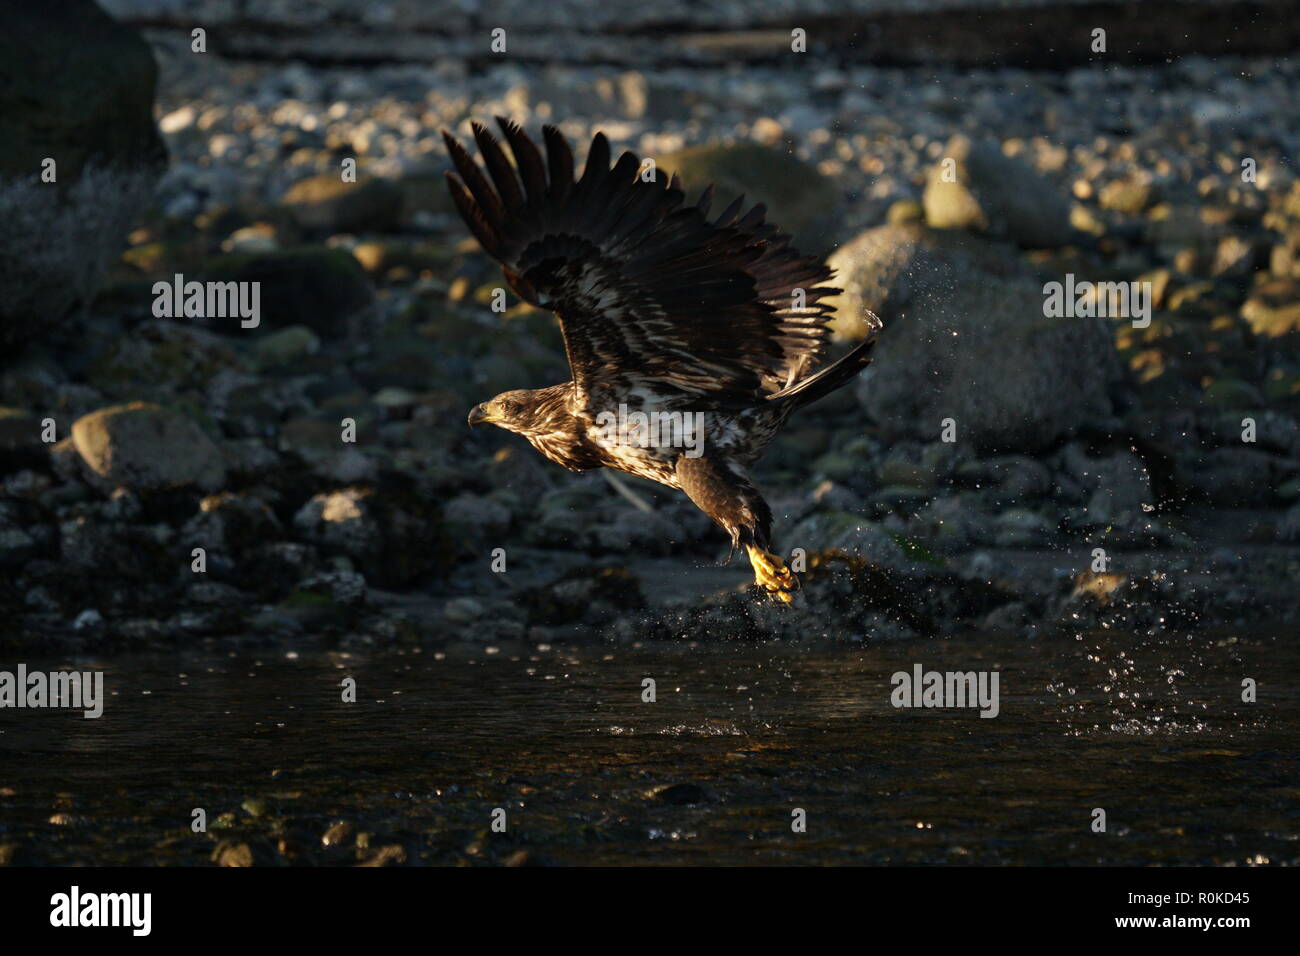 A juvenile bald eagle taking off from water in Sunshine Coast BC Canada, very powerful and majestic Stock Photo